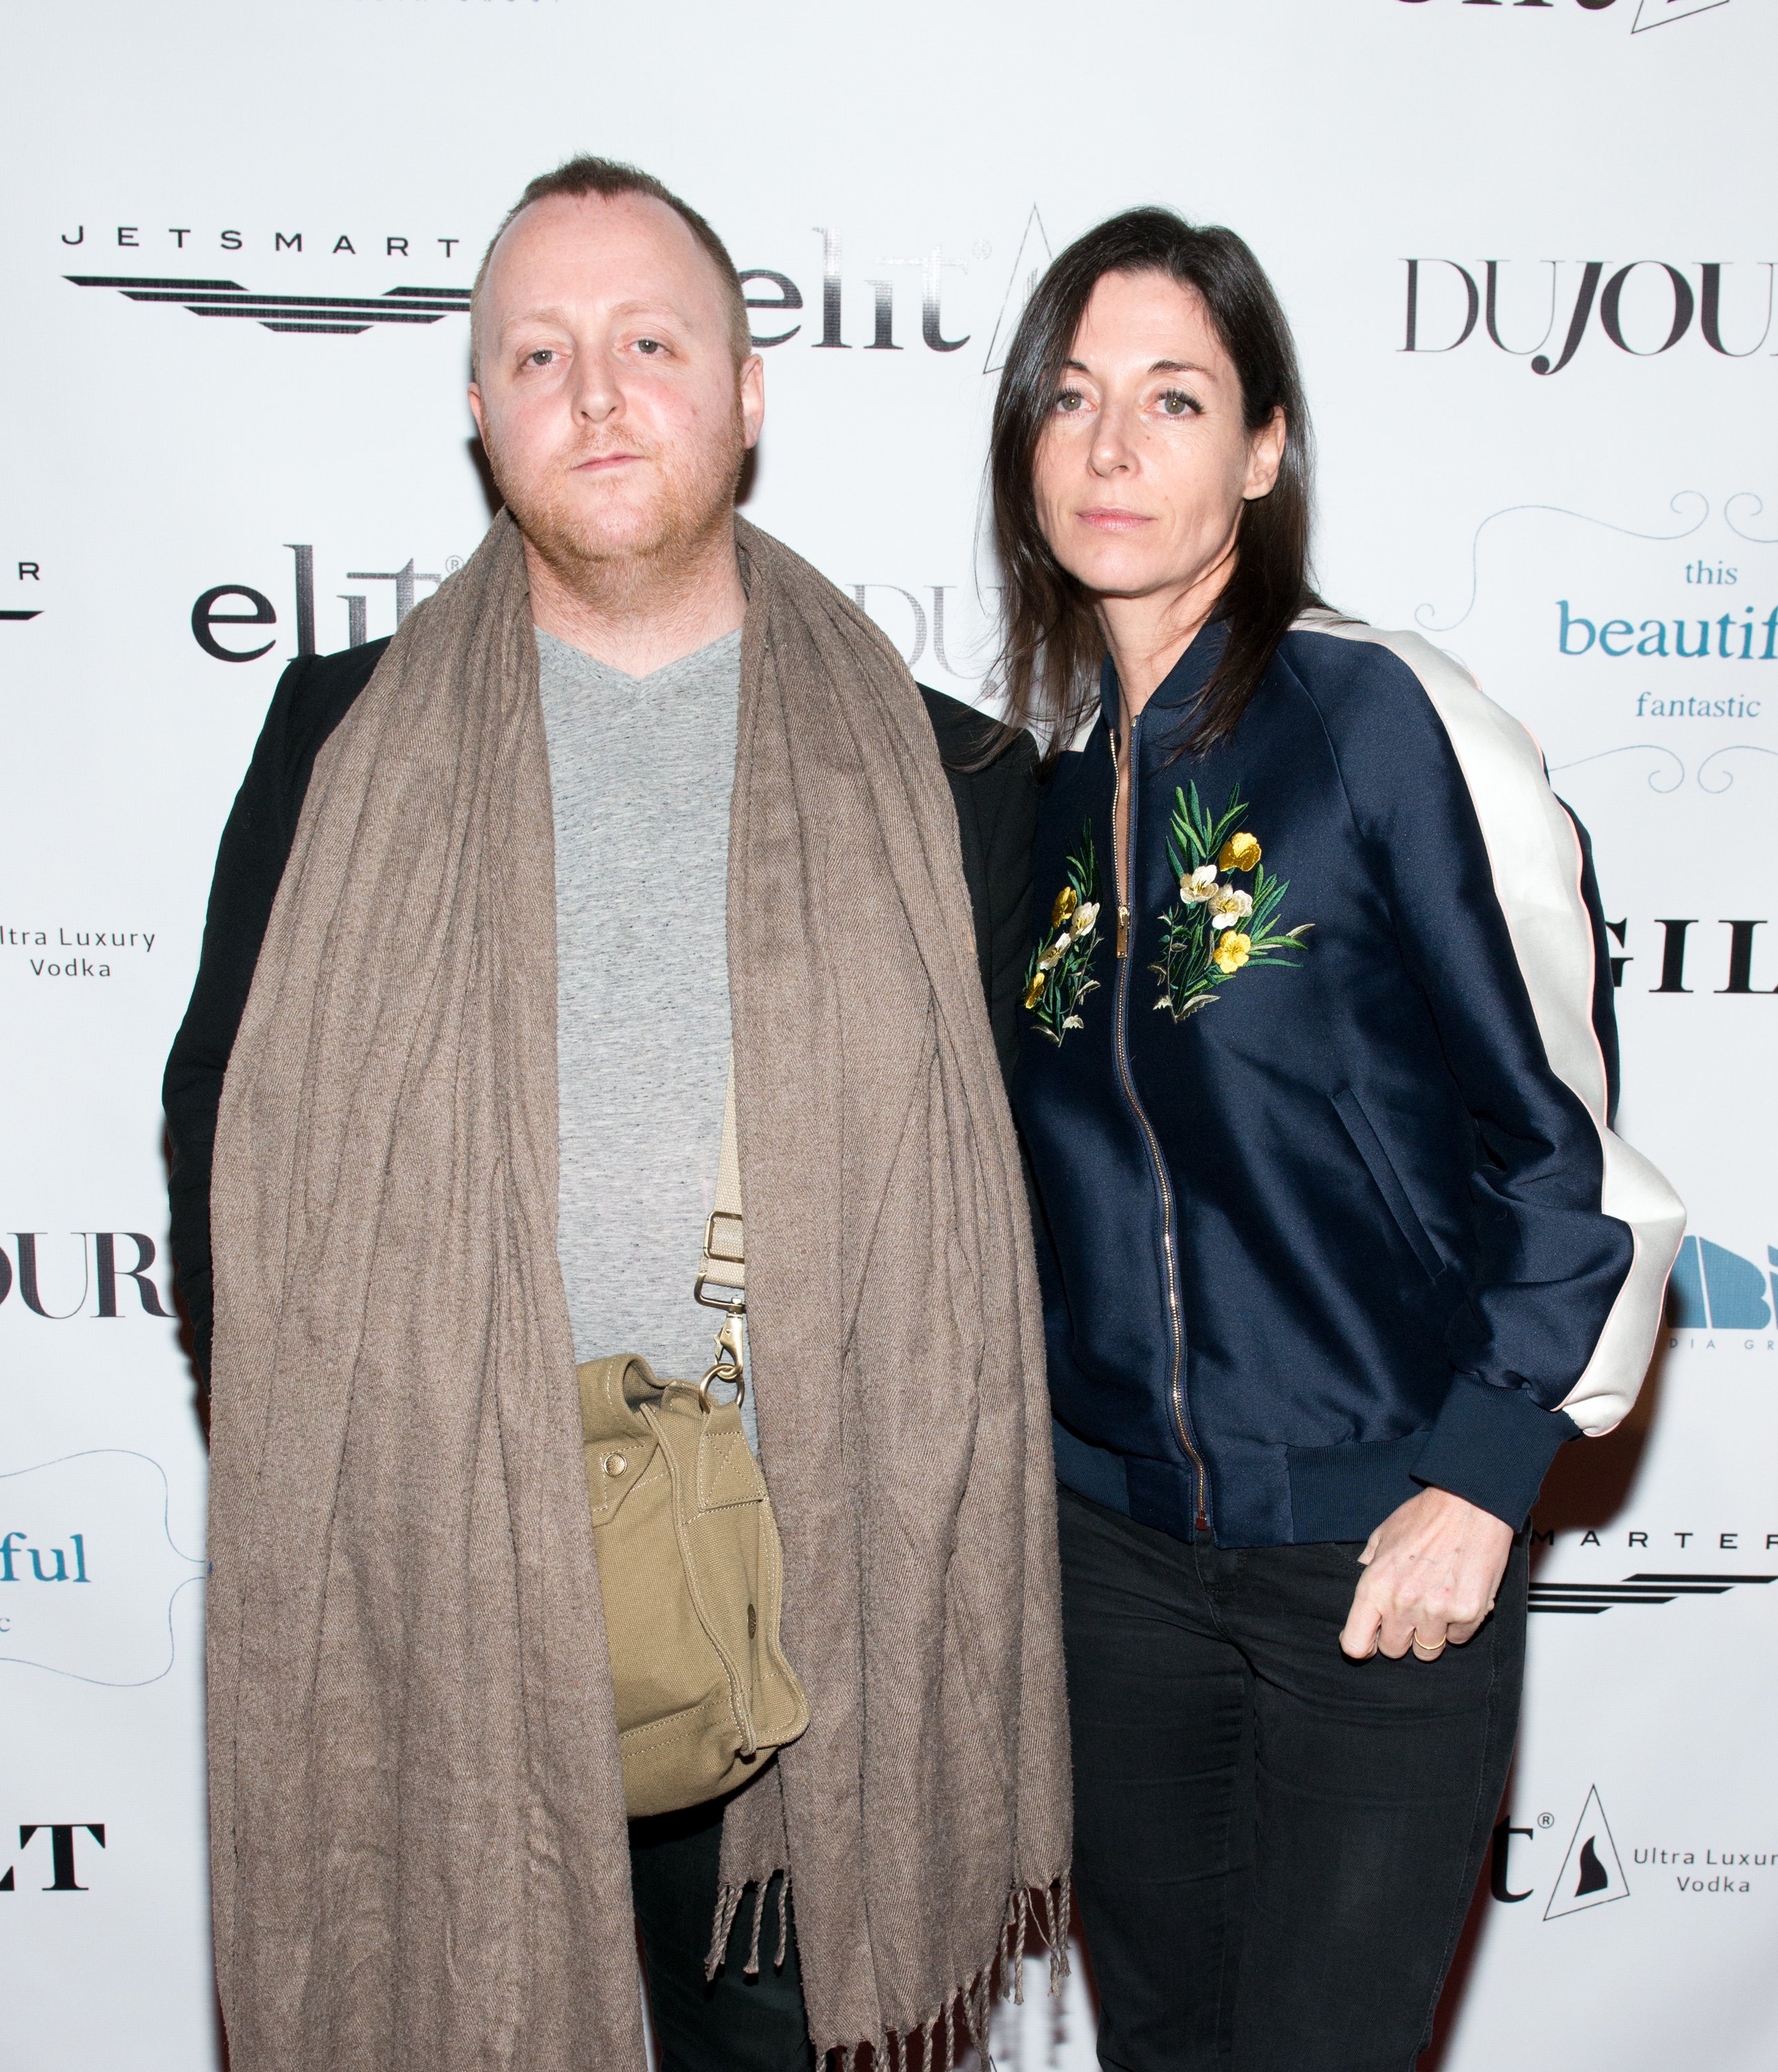 James McCartney and Mary McCartney at the screening of "This Beautiful Fantastic" on December 19, 2016, in New York | Source: Getty Images